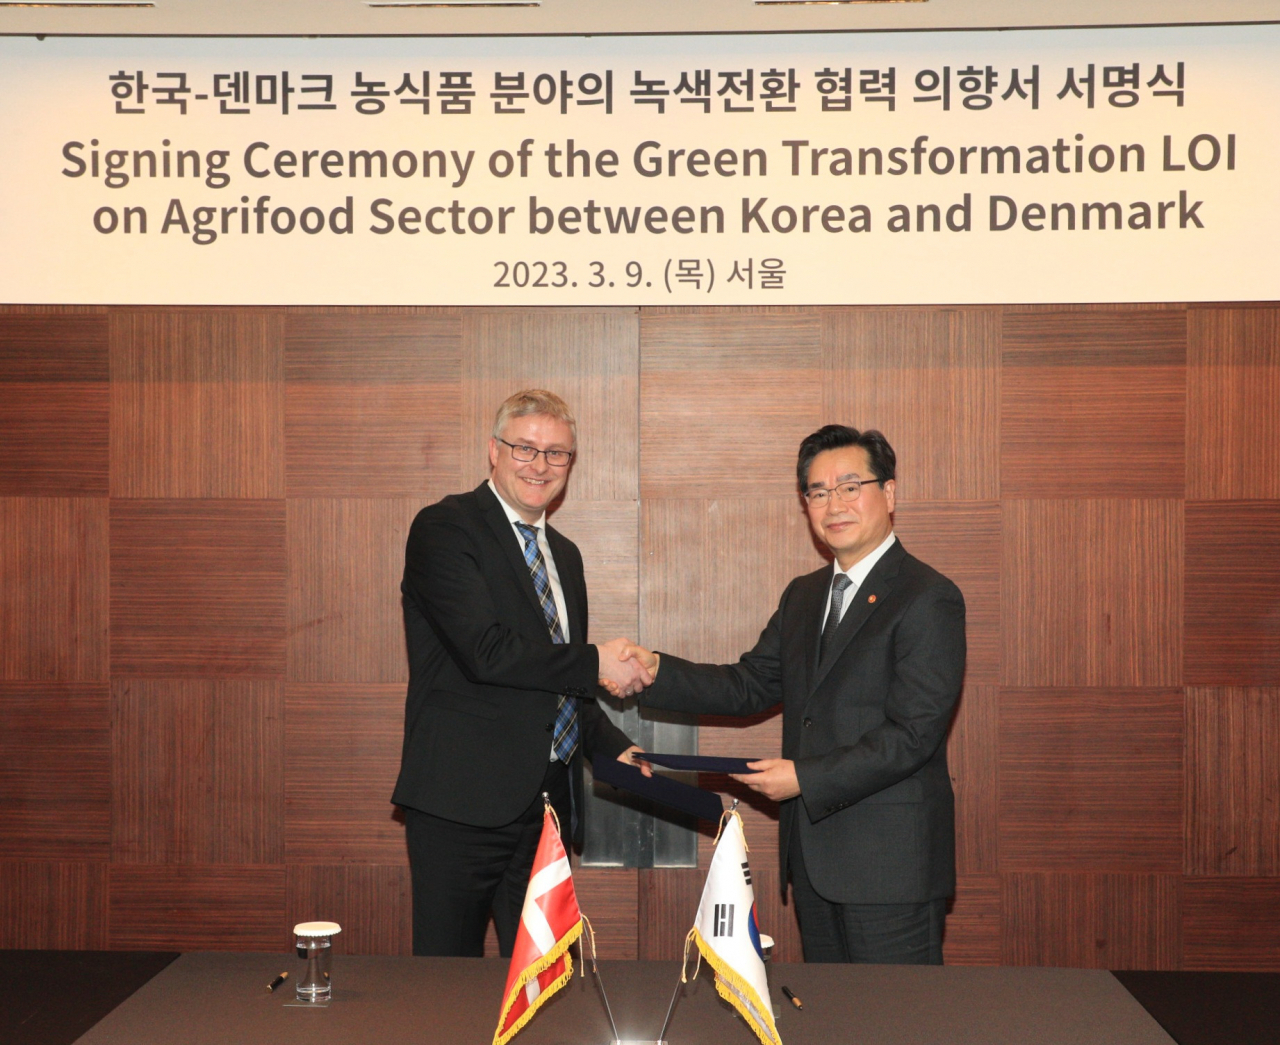 South Korean Minister for Agriculture, Food and Rural Affairs Chung Hwang-keun (right) and his Danish counterpart, Jacob Jensen, pose for a photo after signing a letter of intent to cooperate on promoting the green transformation of the agrifood sector at the Shilla Seoul in Jung-gu, Seoul on Thursday. (Ministry of Agriculture, Food and Rural Affairs)